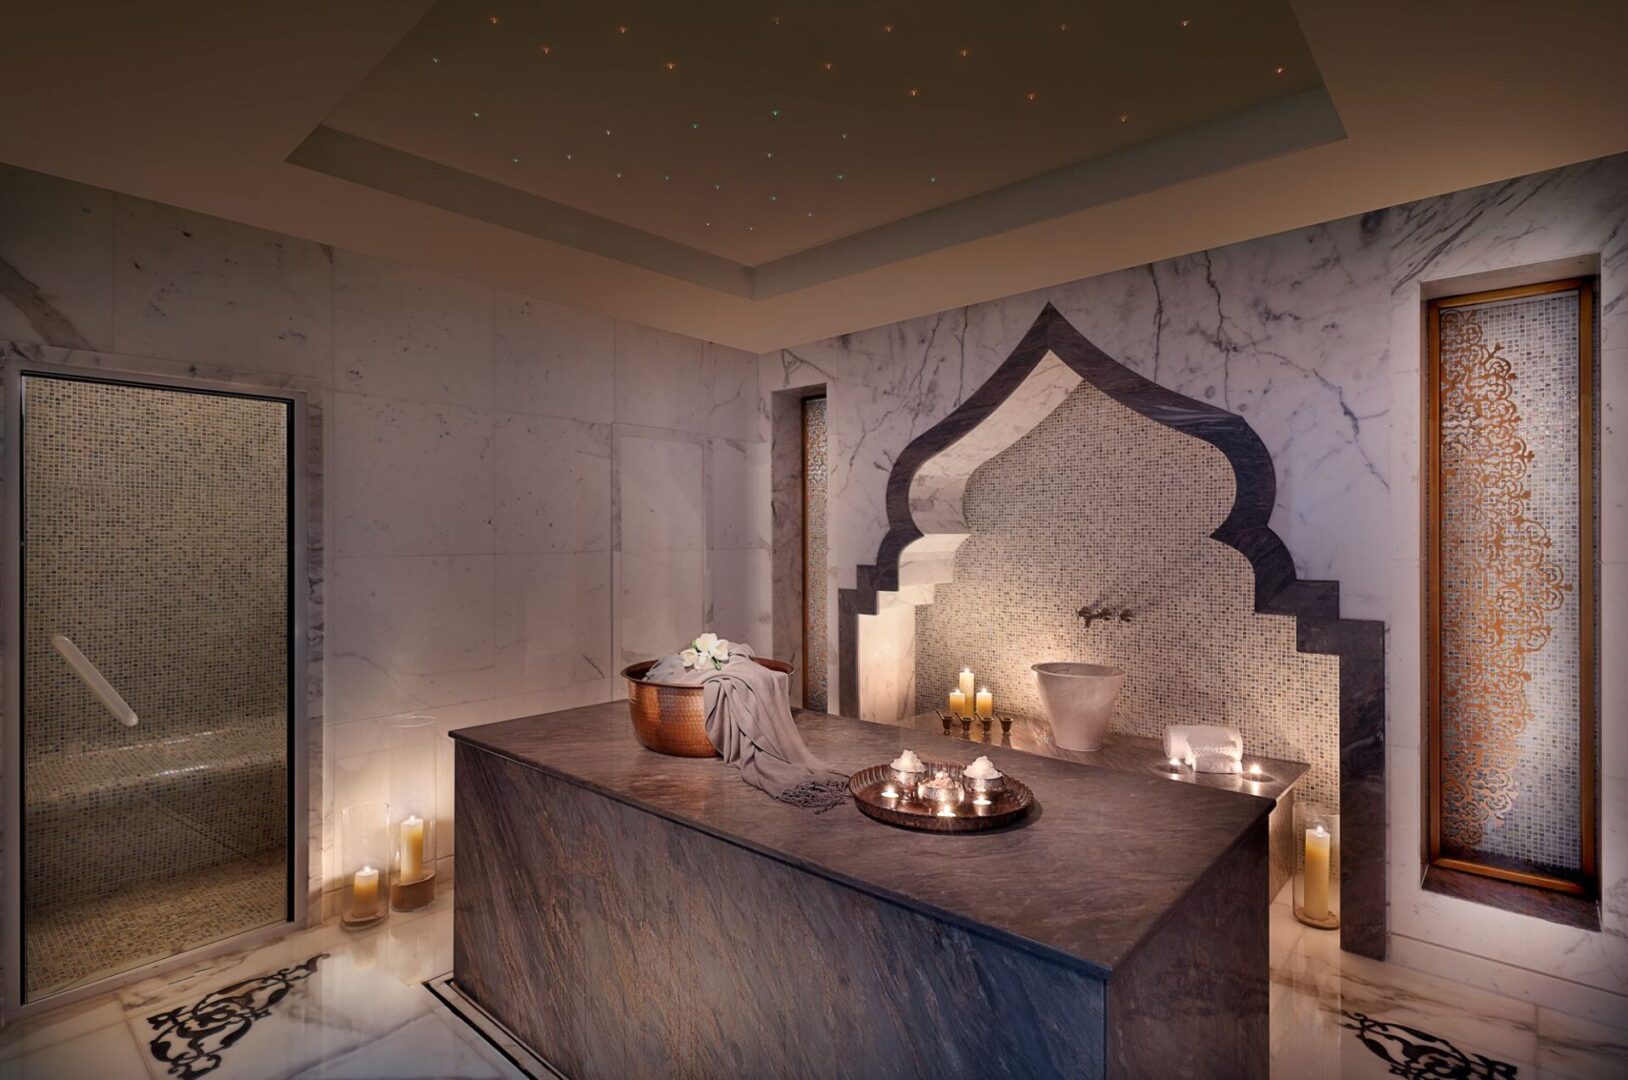 A spa room with candles and a large stone table.